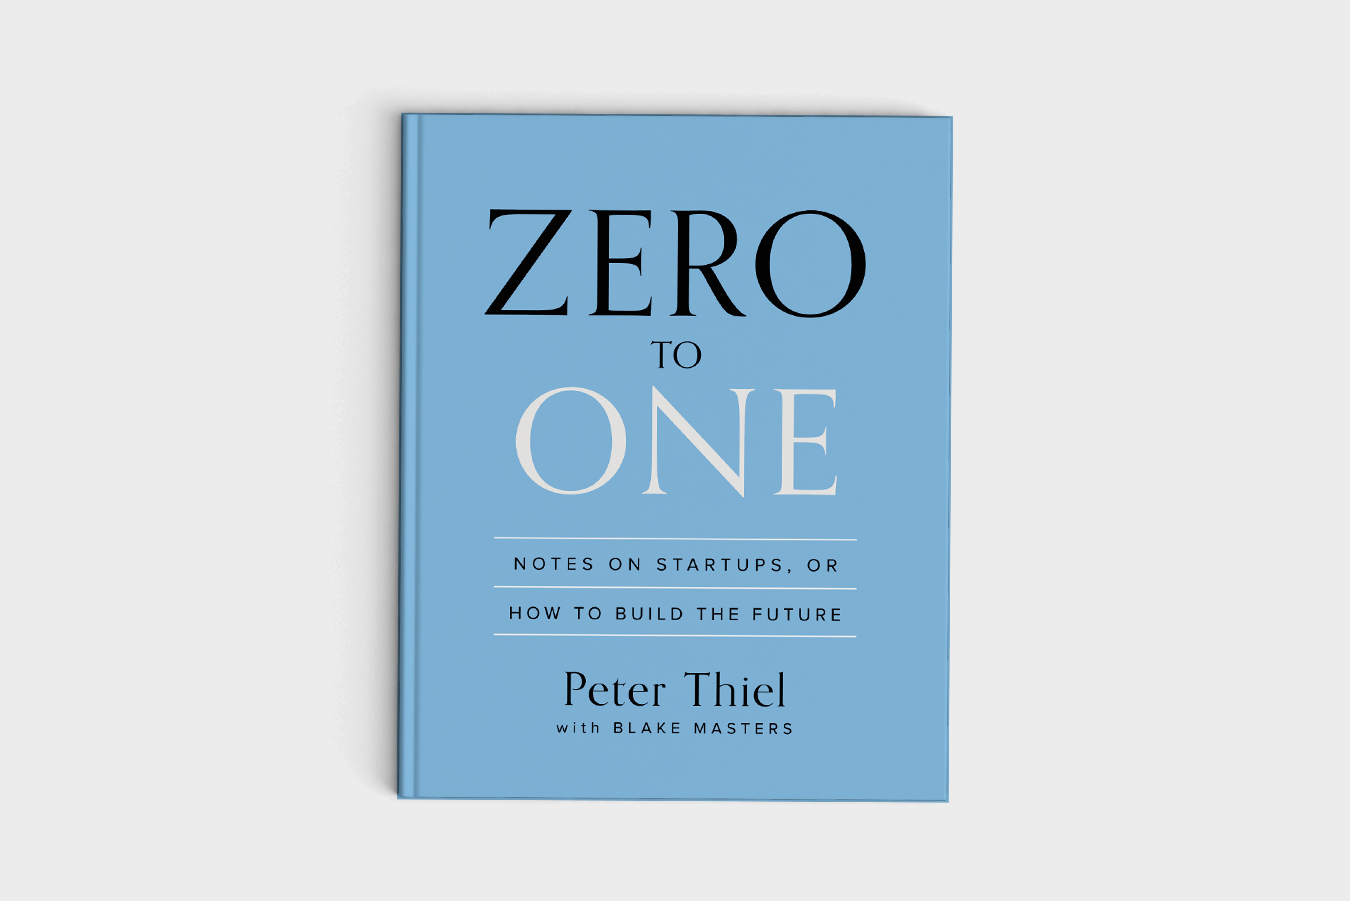 Key product management quotes from Zero to One